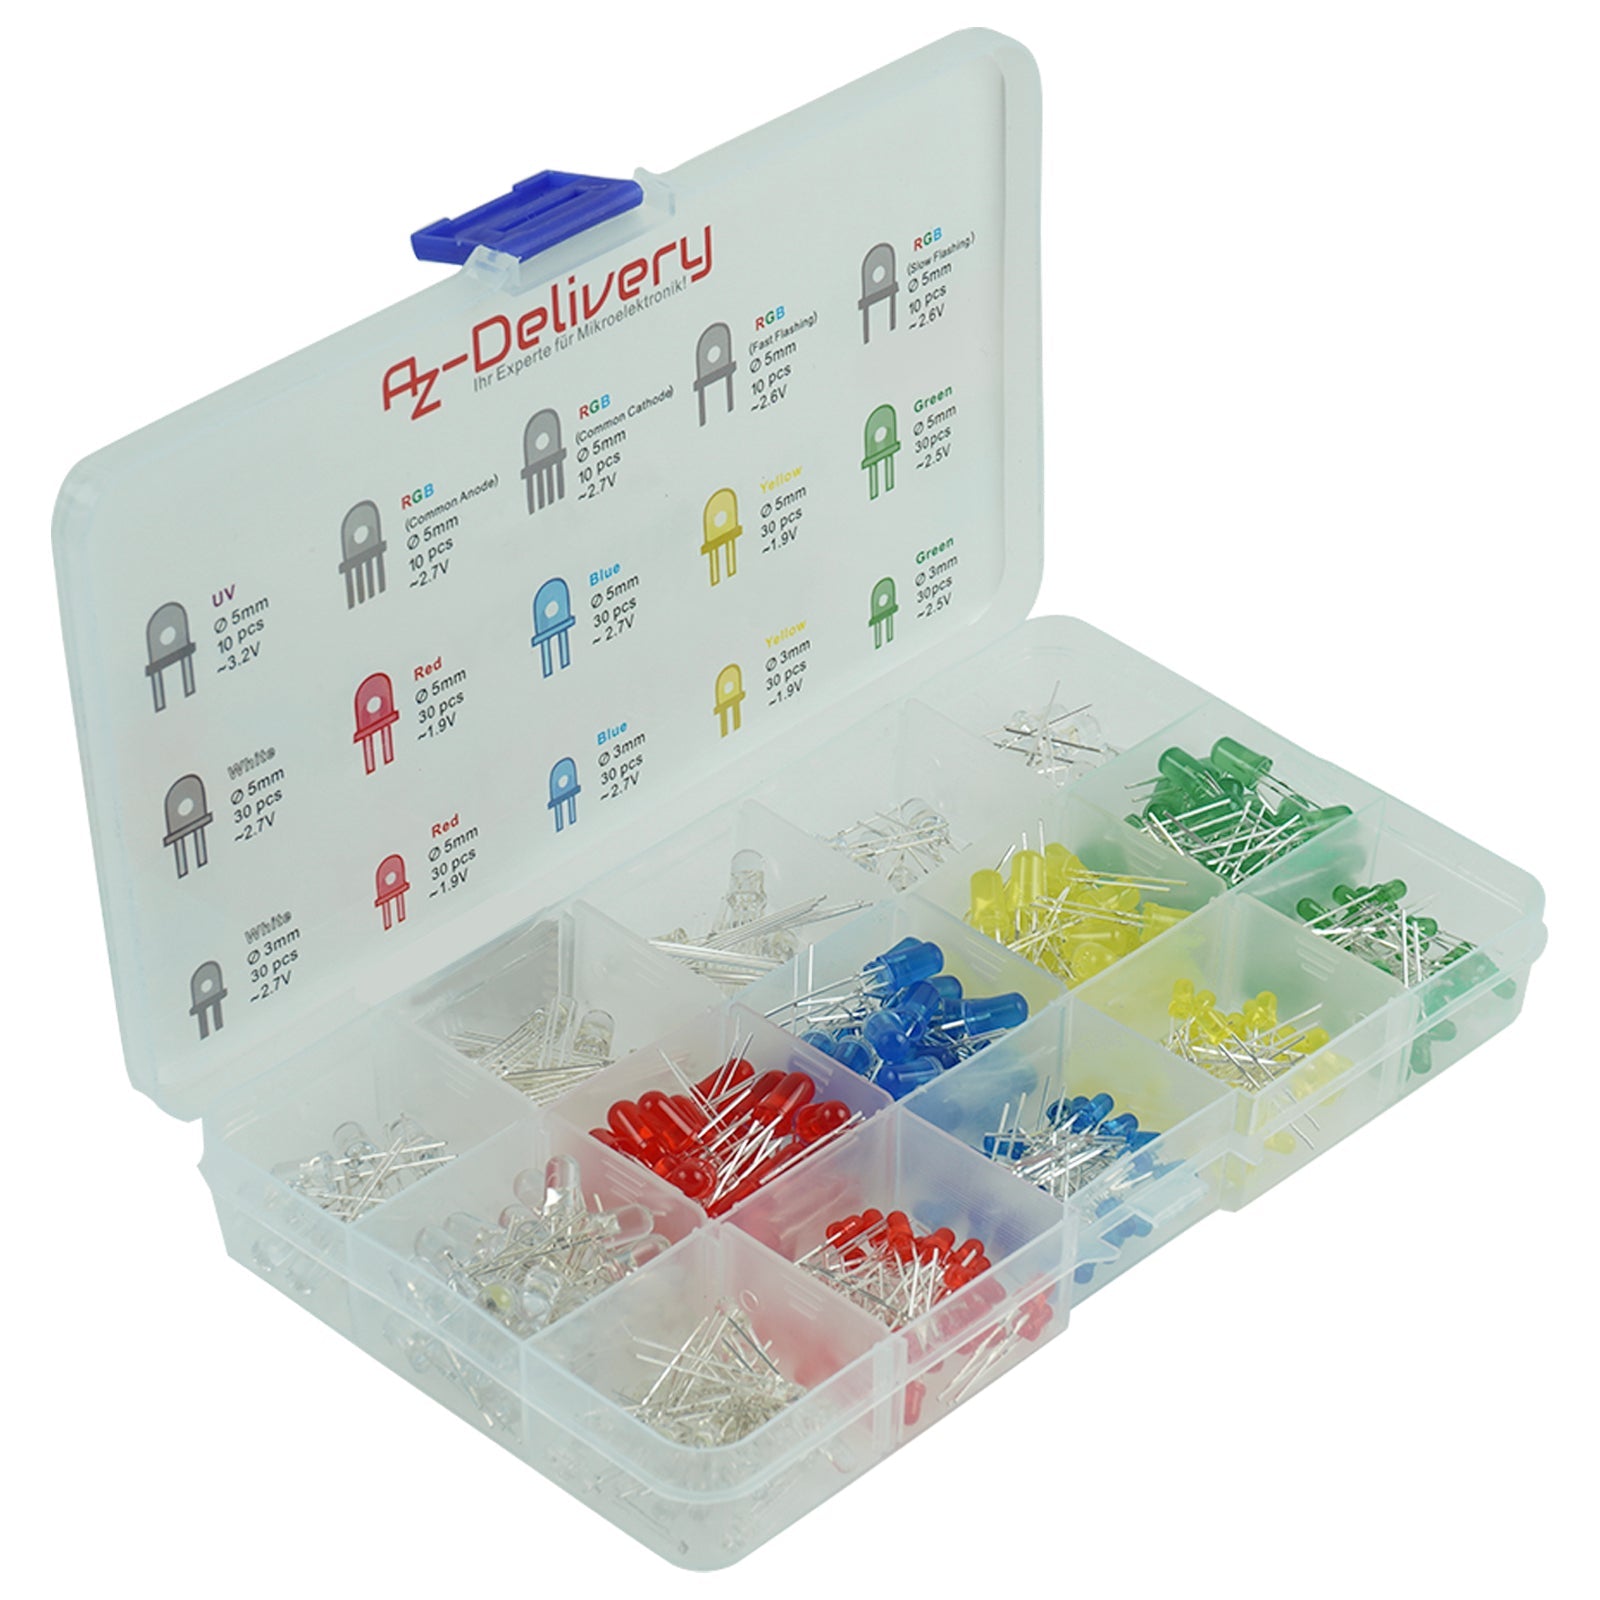 LED light emitting diodes assortment kit, 350 pieces, 3mm & 5mm, 5 colours